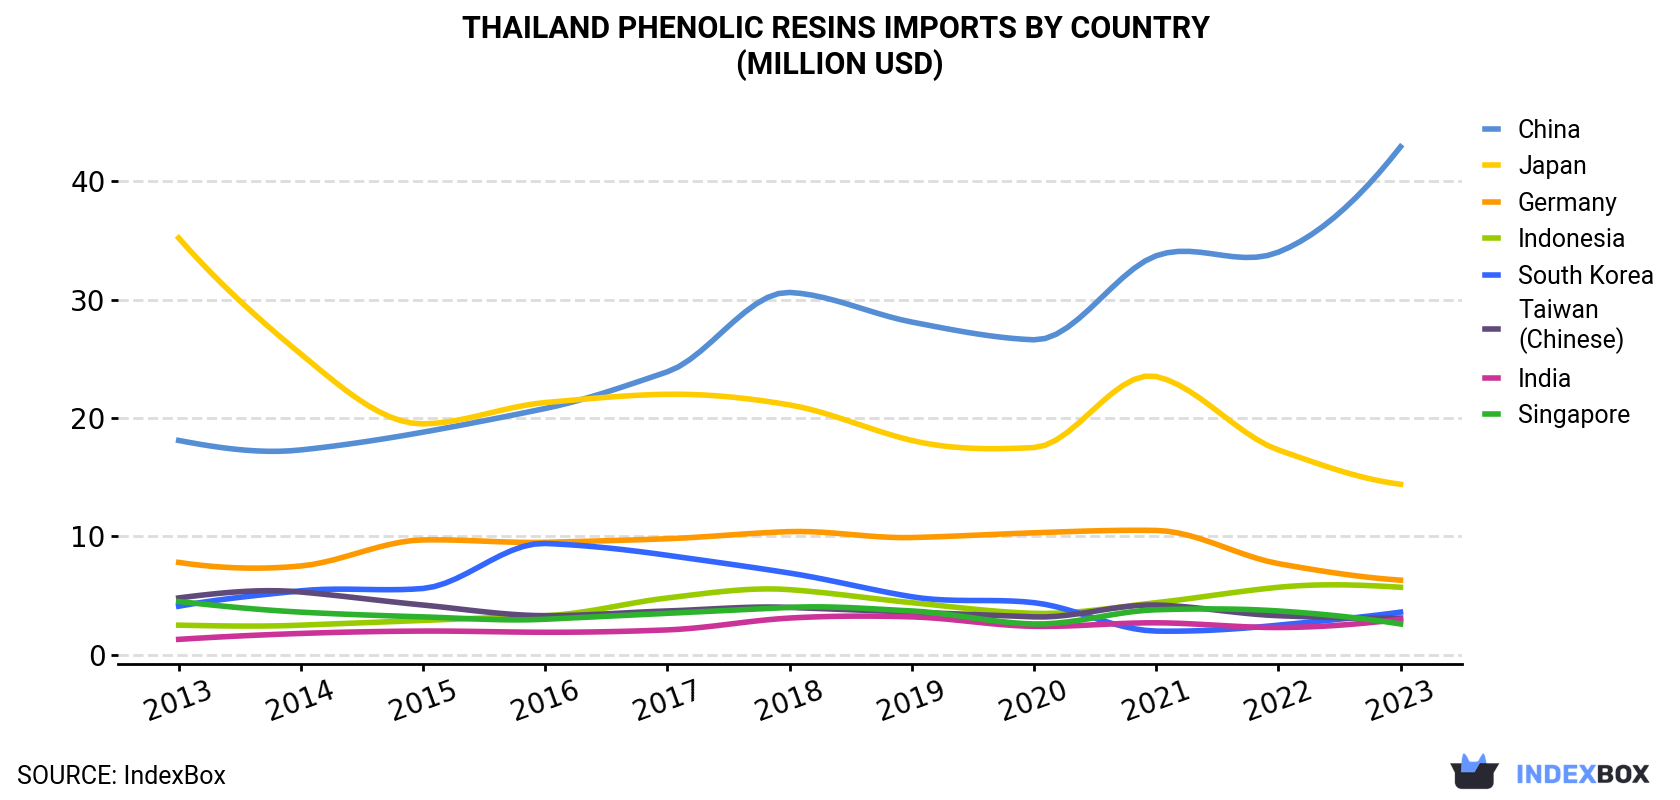 Thailand Phenolic Resins Imports By Country (Million USD)